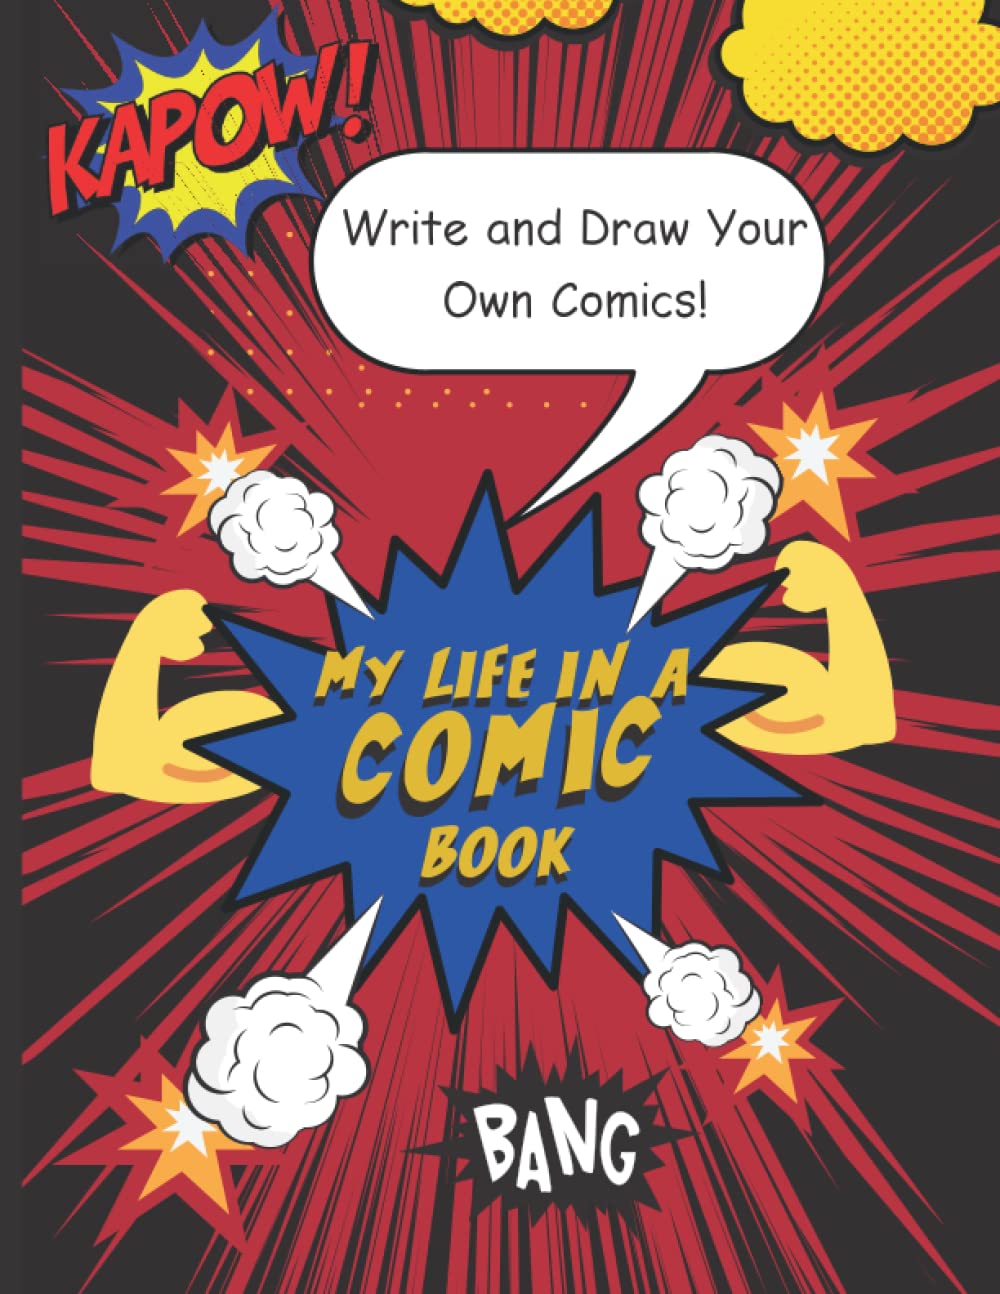 My Life in a Comic Book: Write and Draw Your Own Comics